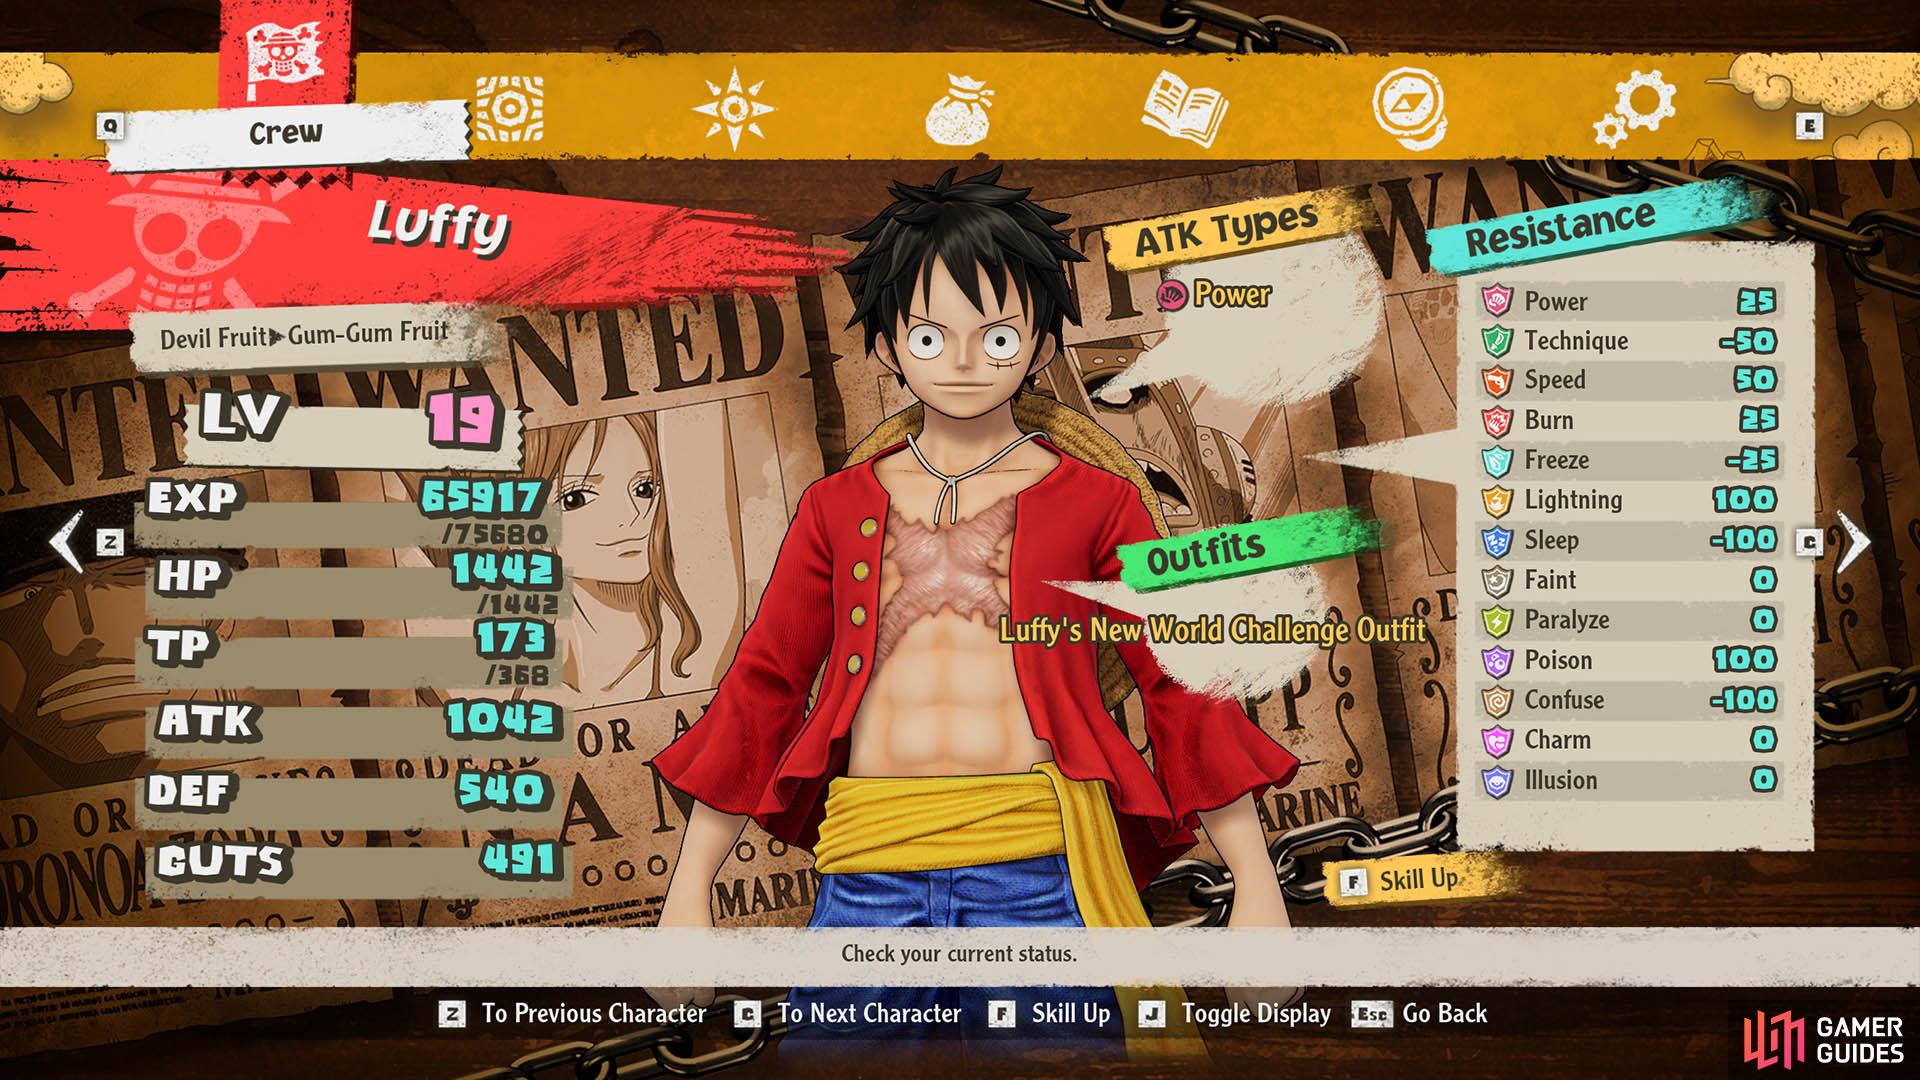 ONE PIECE ODYSSEY Starter Guide: Tips to know before playing the game